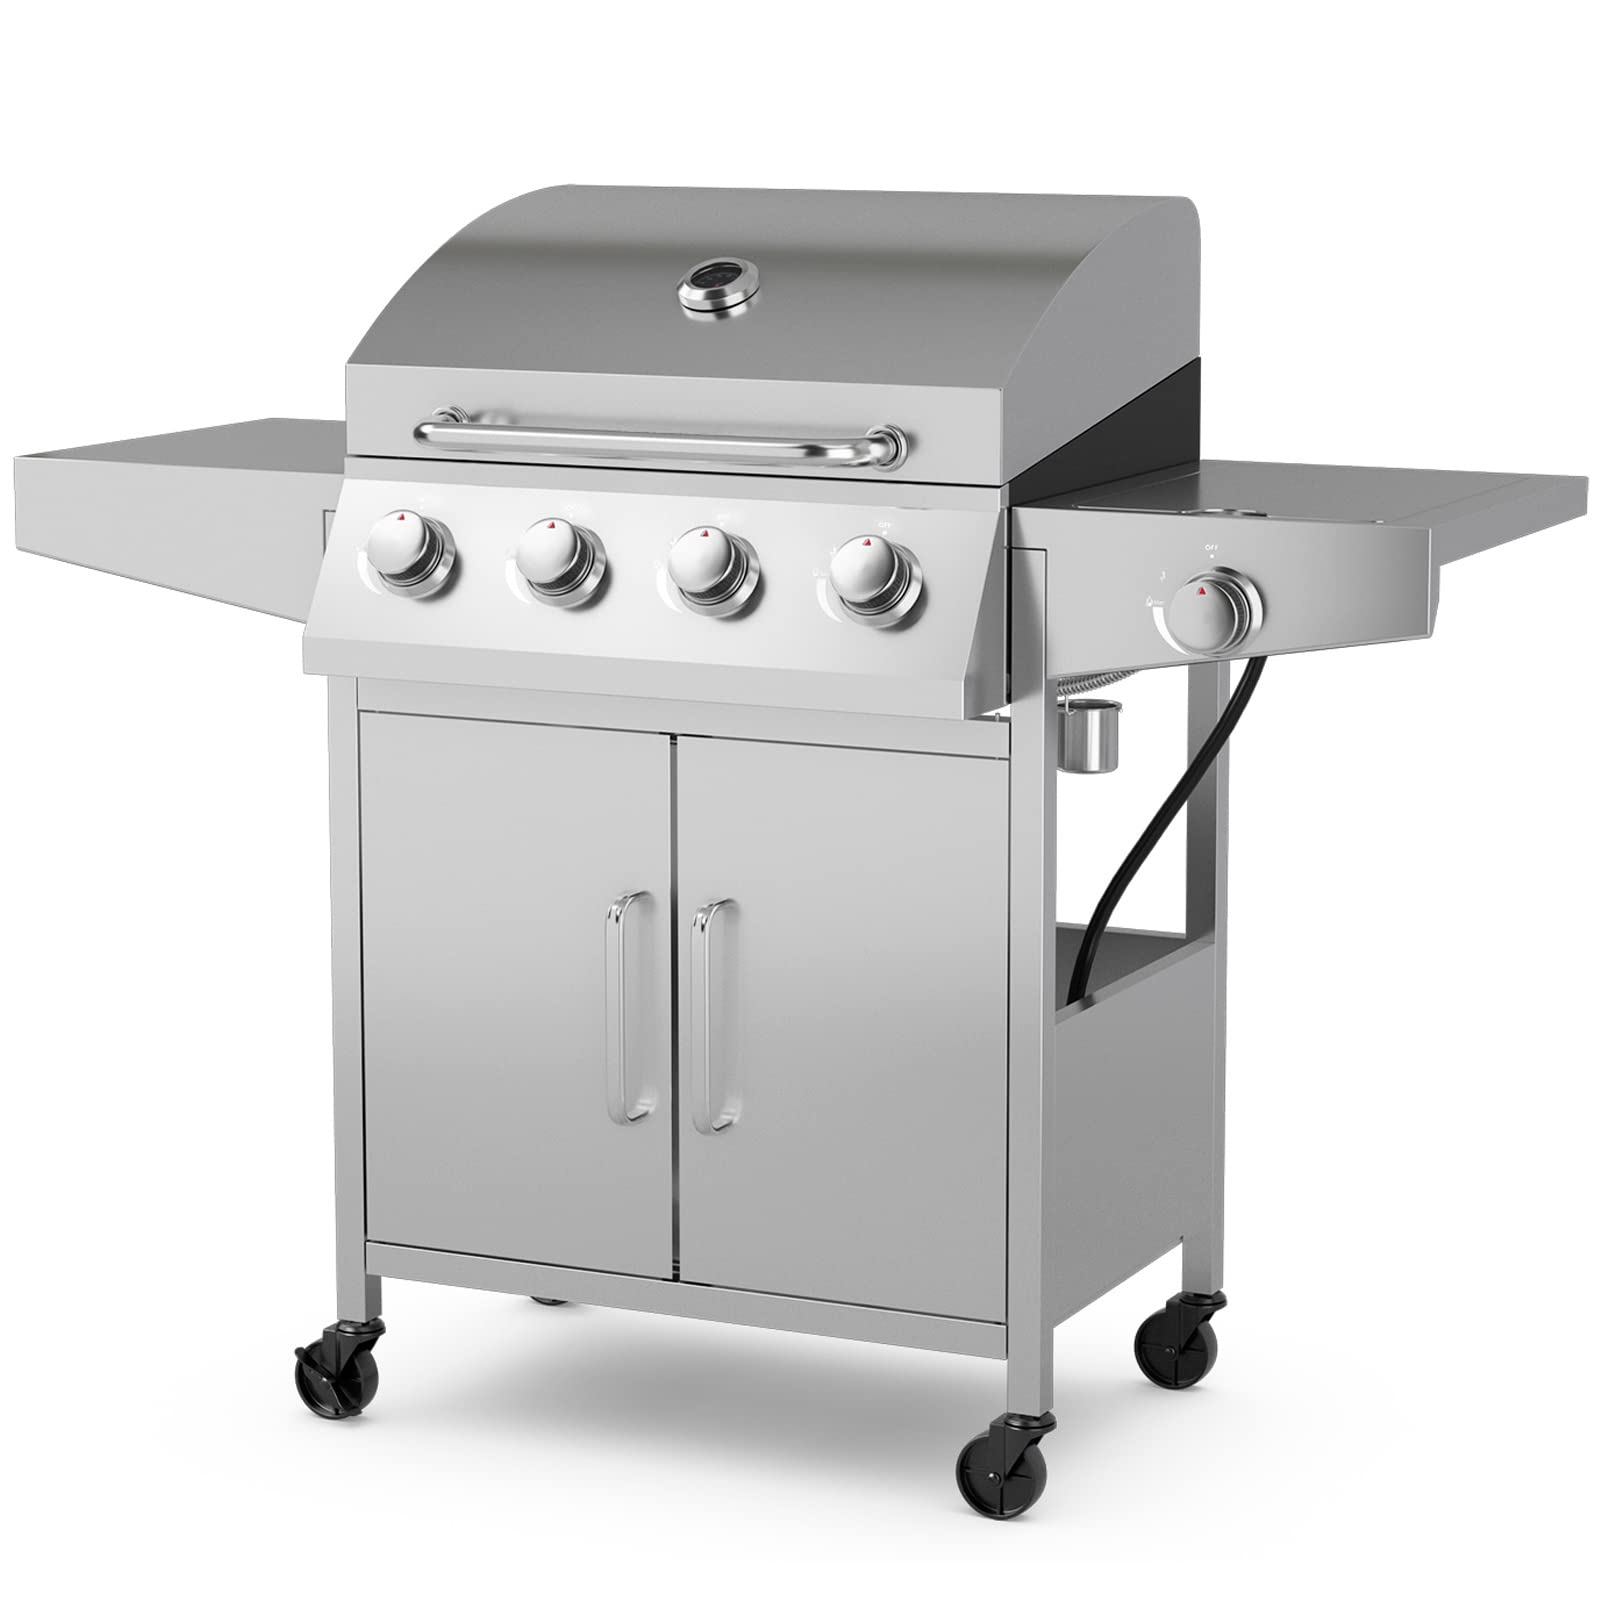 Giantex Propane Gas Grill with 4 Main Burners and Side Burner, total 50,000 BTU